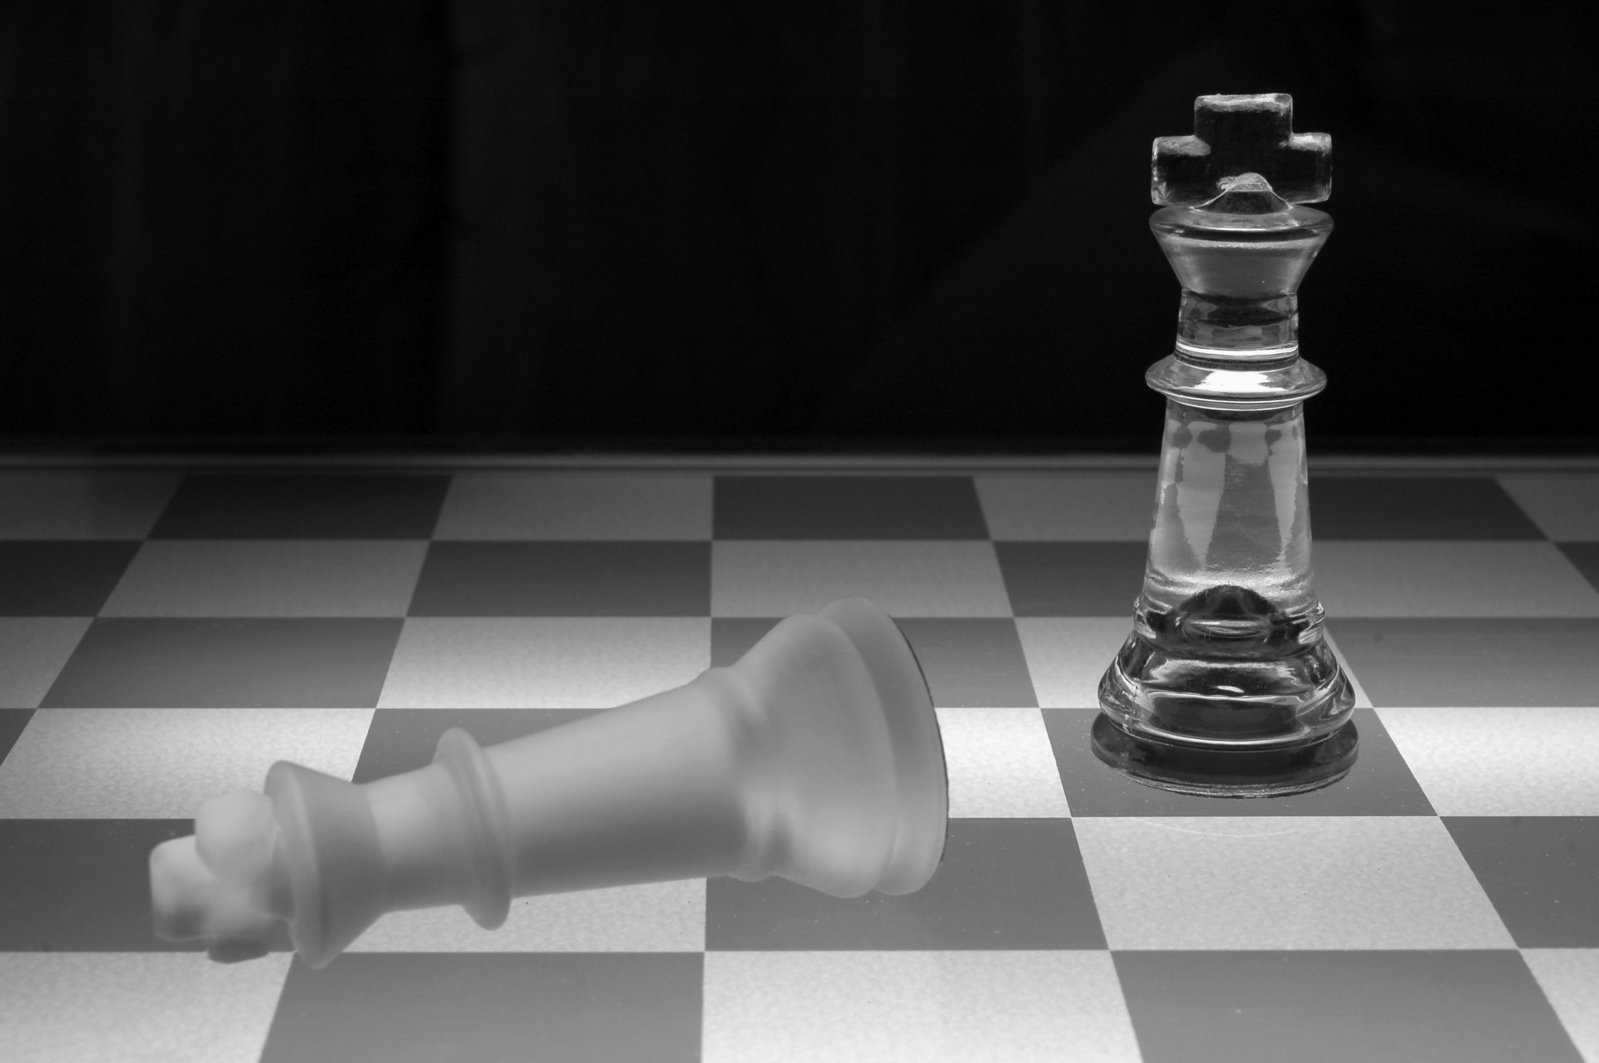 two pieces of chess on the table are being pographed